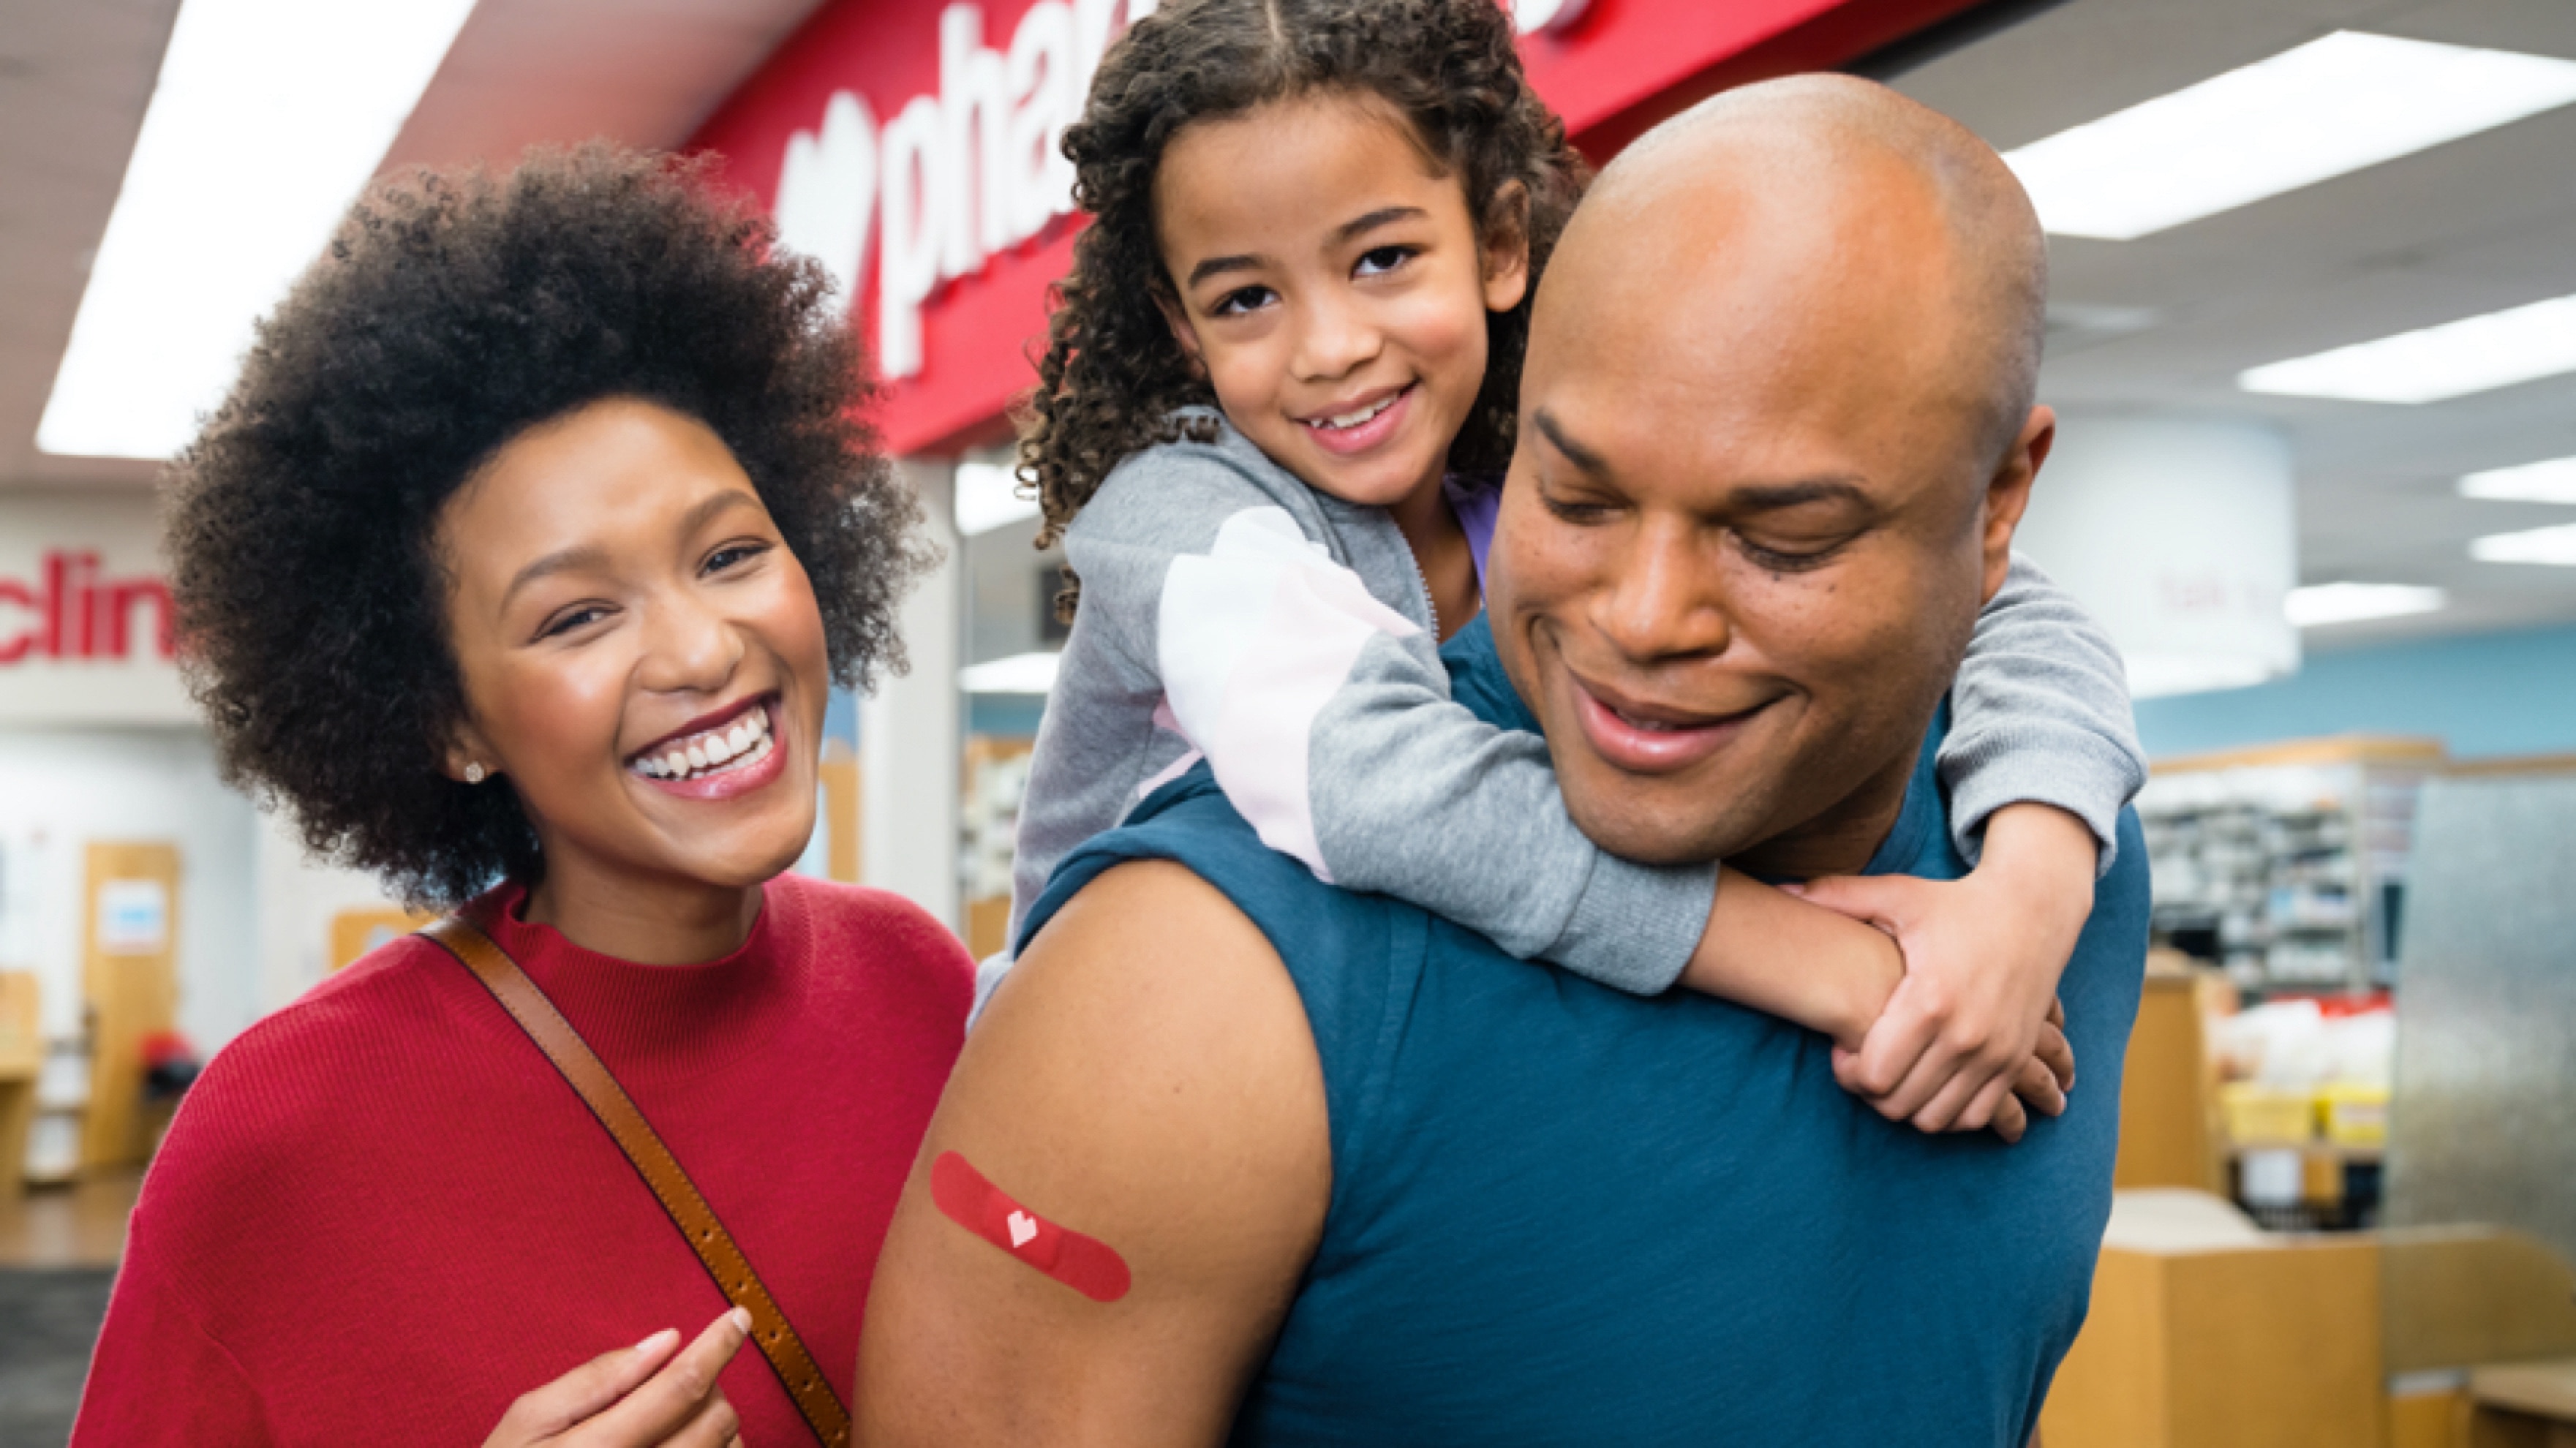 Happy family all with red CVS bandages on arms after receiving	flu shots